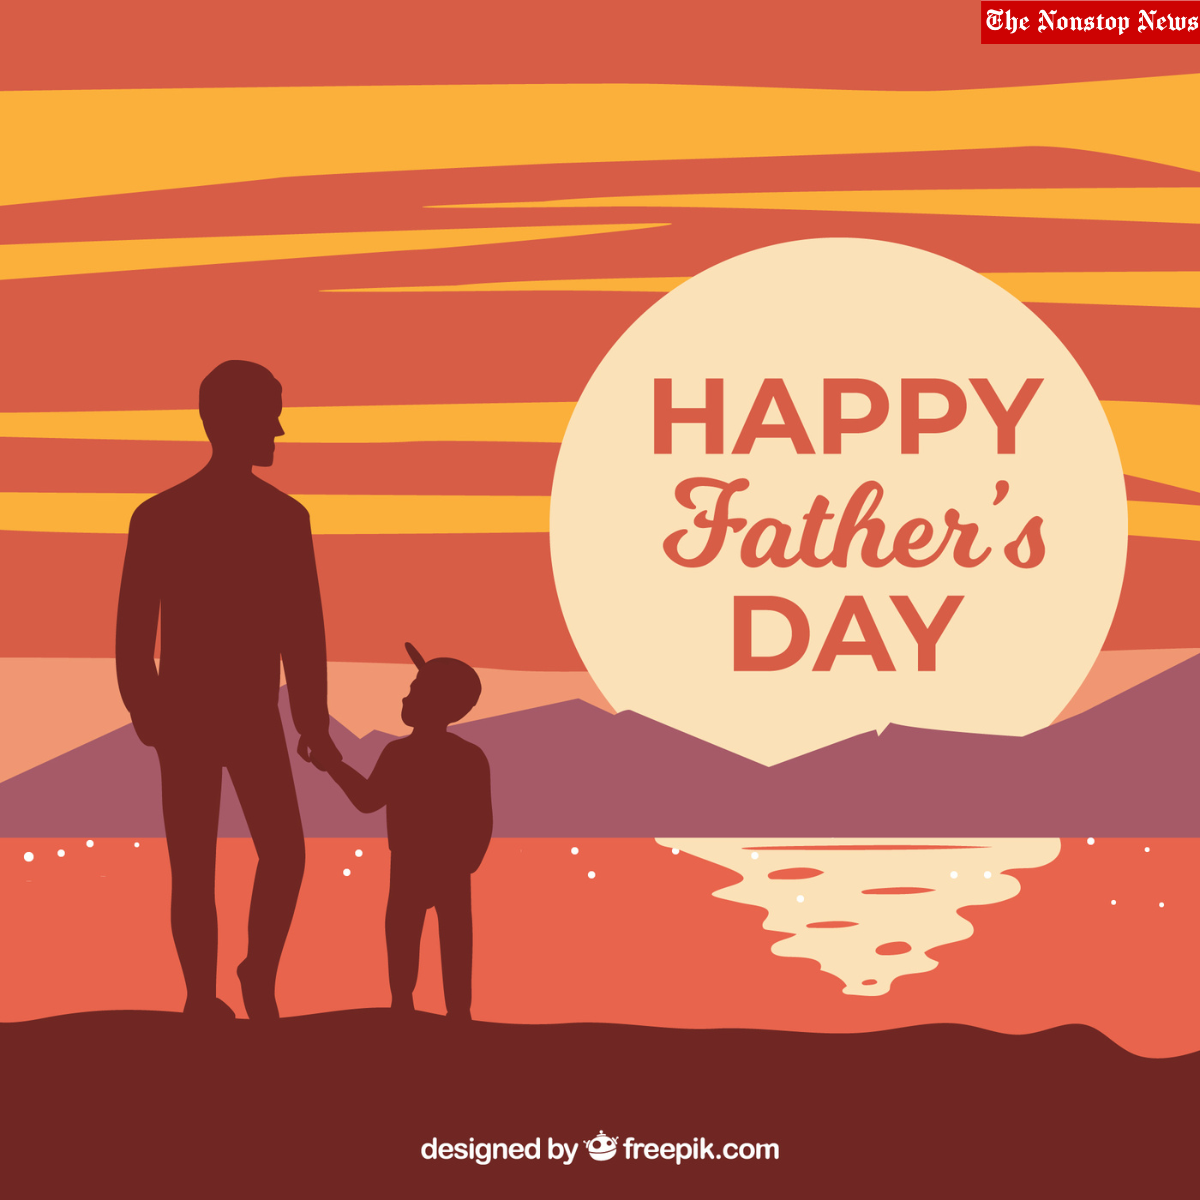 Happy Father's Day 2022: Best WhatsApp Status Video to Download For Free